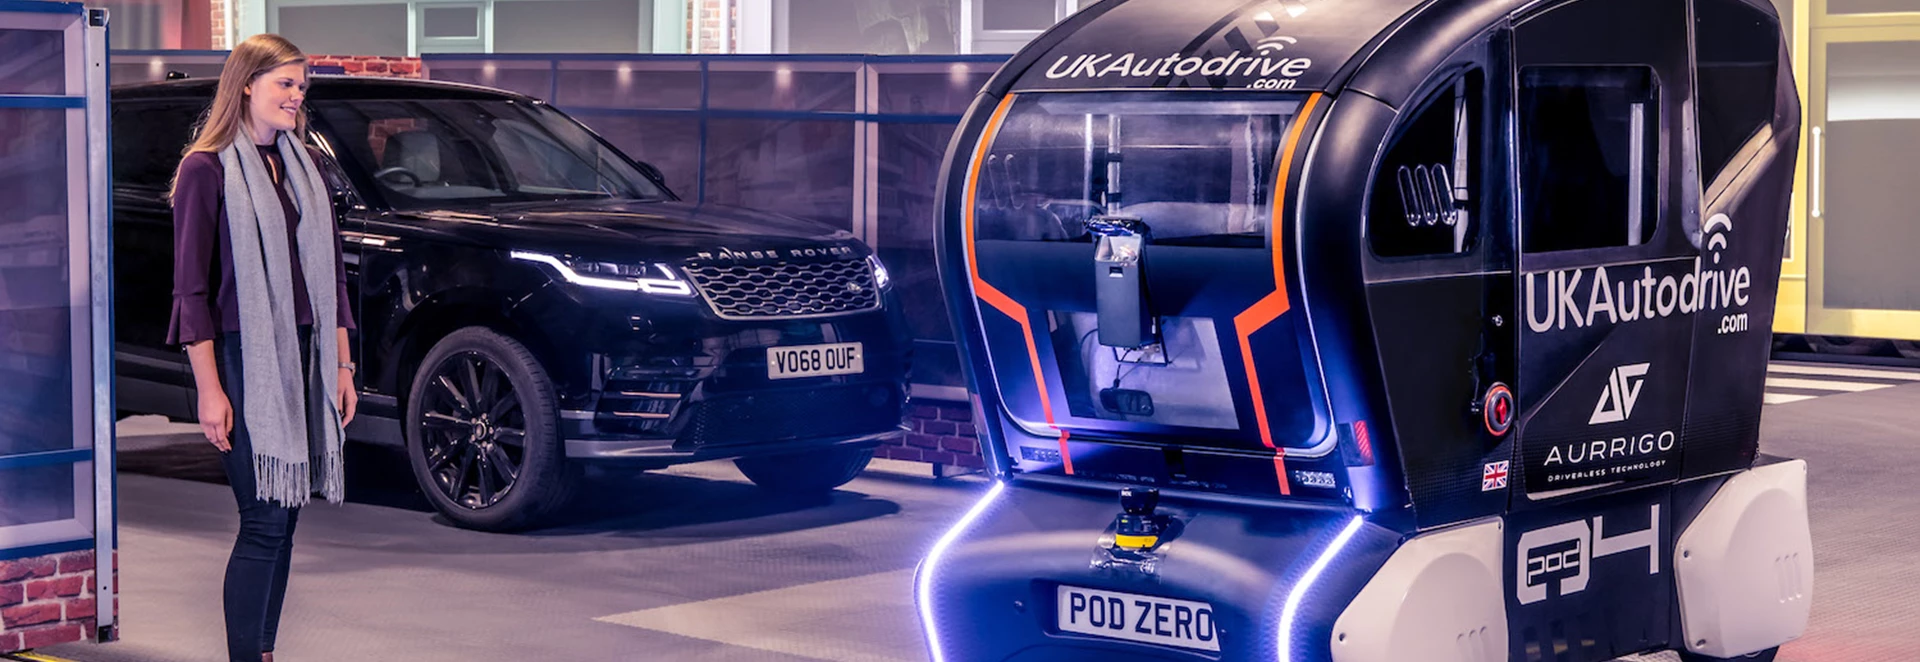 Jaguar Land Rover tests self-driving vehicles with directional projectors